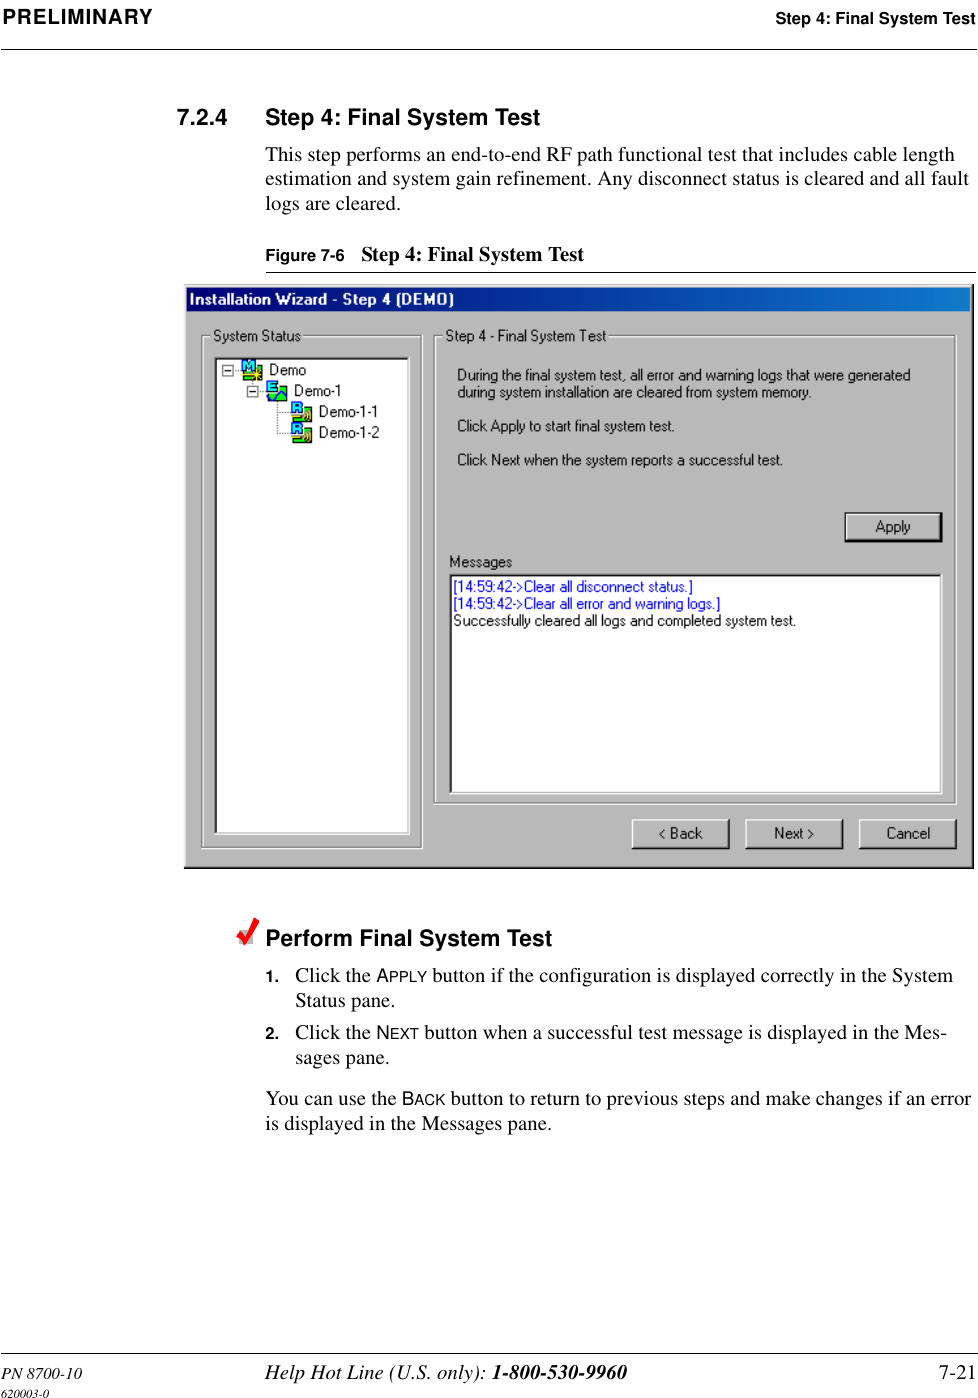 PN 8700-10 Help Hot Line (U.S. only): 1-800-530-9960 7-21620003-0PRELIMINARY Step 4: Final System Test7.2.4 Step 4: Final System TestThis step performs an end-to-end RF path functional test that includes cable length estimation and system gain refinement. Any disconnect status is cleared and all fault logs are cleared.Figure 7-6 Step 4: Final System TestPerform Final System Test1. Click the APPLY button if the configuration is displayed correctly in the System Status pane.2. Click the NEXT button when a successful test message is displayed in the Mes-sages pane.You can use the BACK button to return to previous steps and make changes if an error is displayed in the Messages pane.